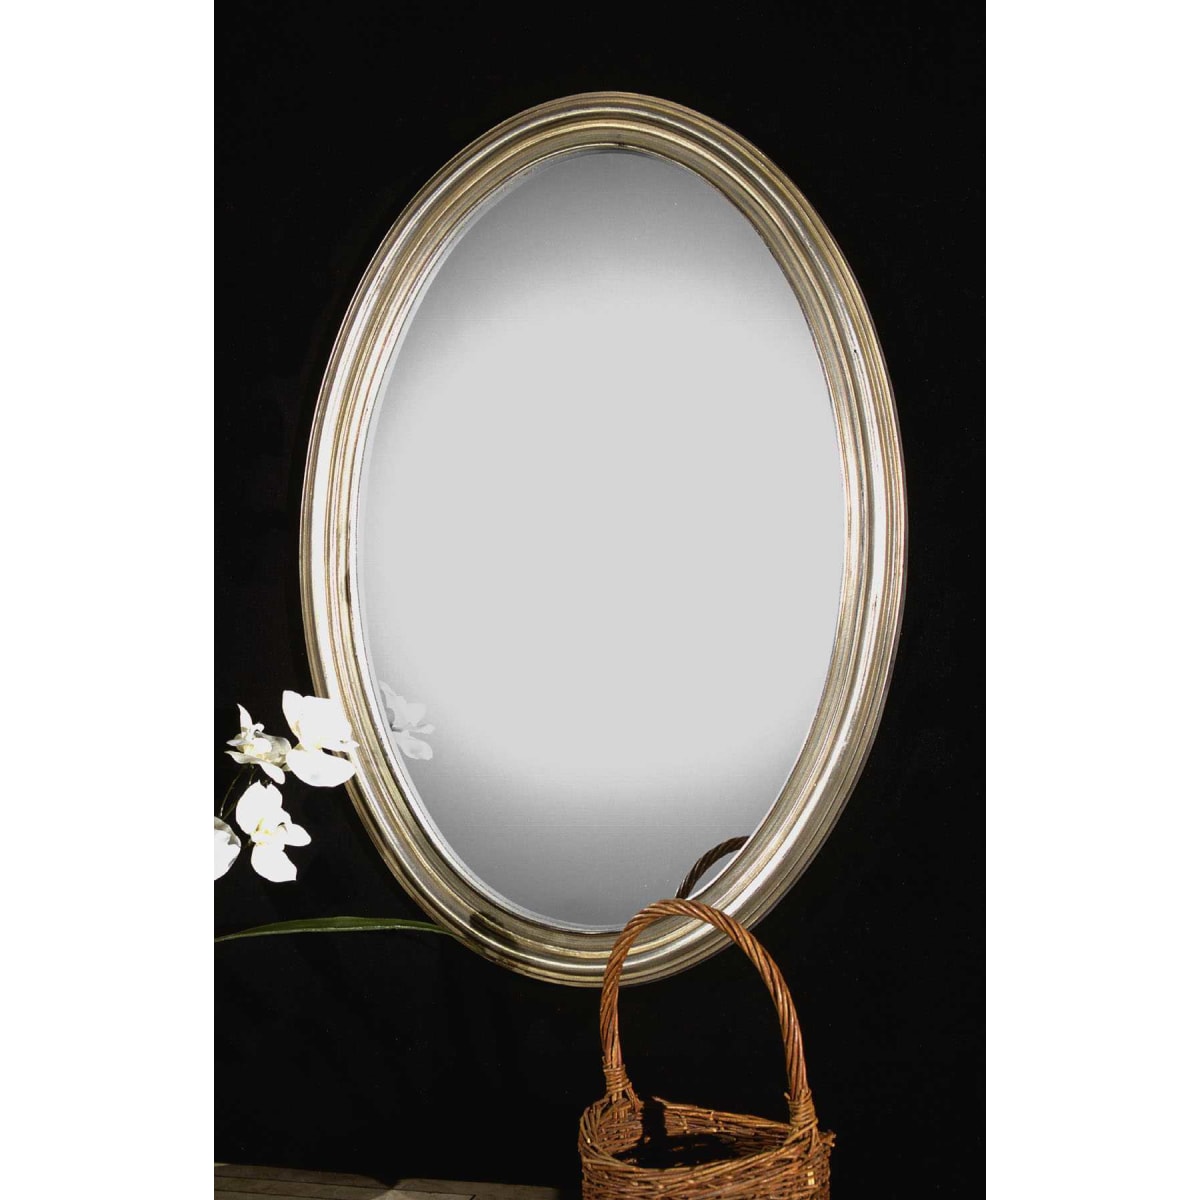 Uttermost 19580 22-Inch by 28-Inch Frameless Vanity Oval Mirror by Uttermos - 2